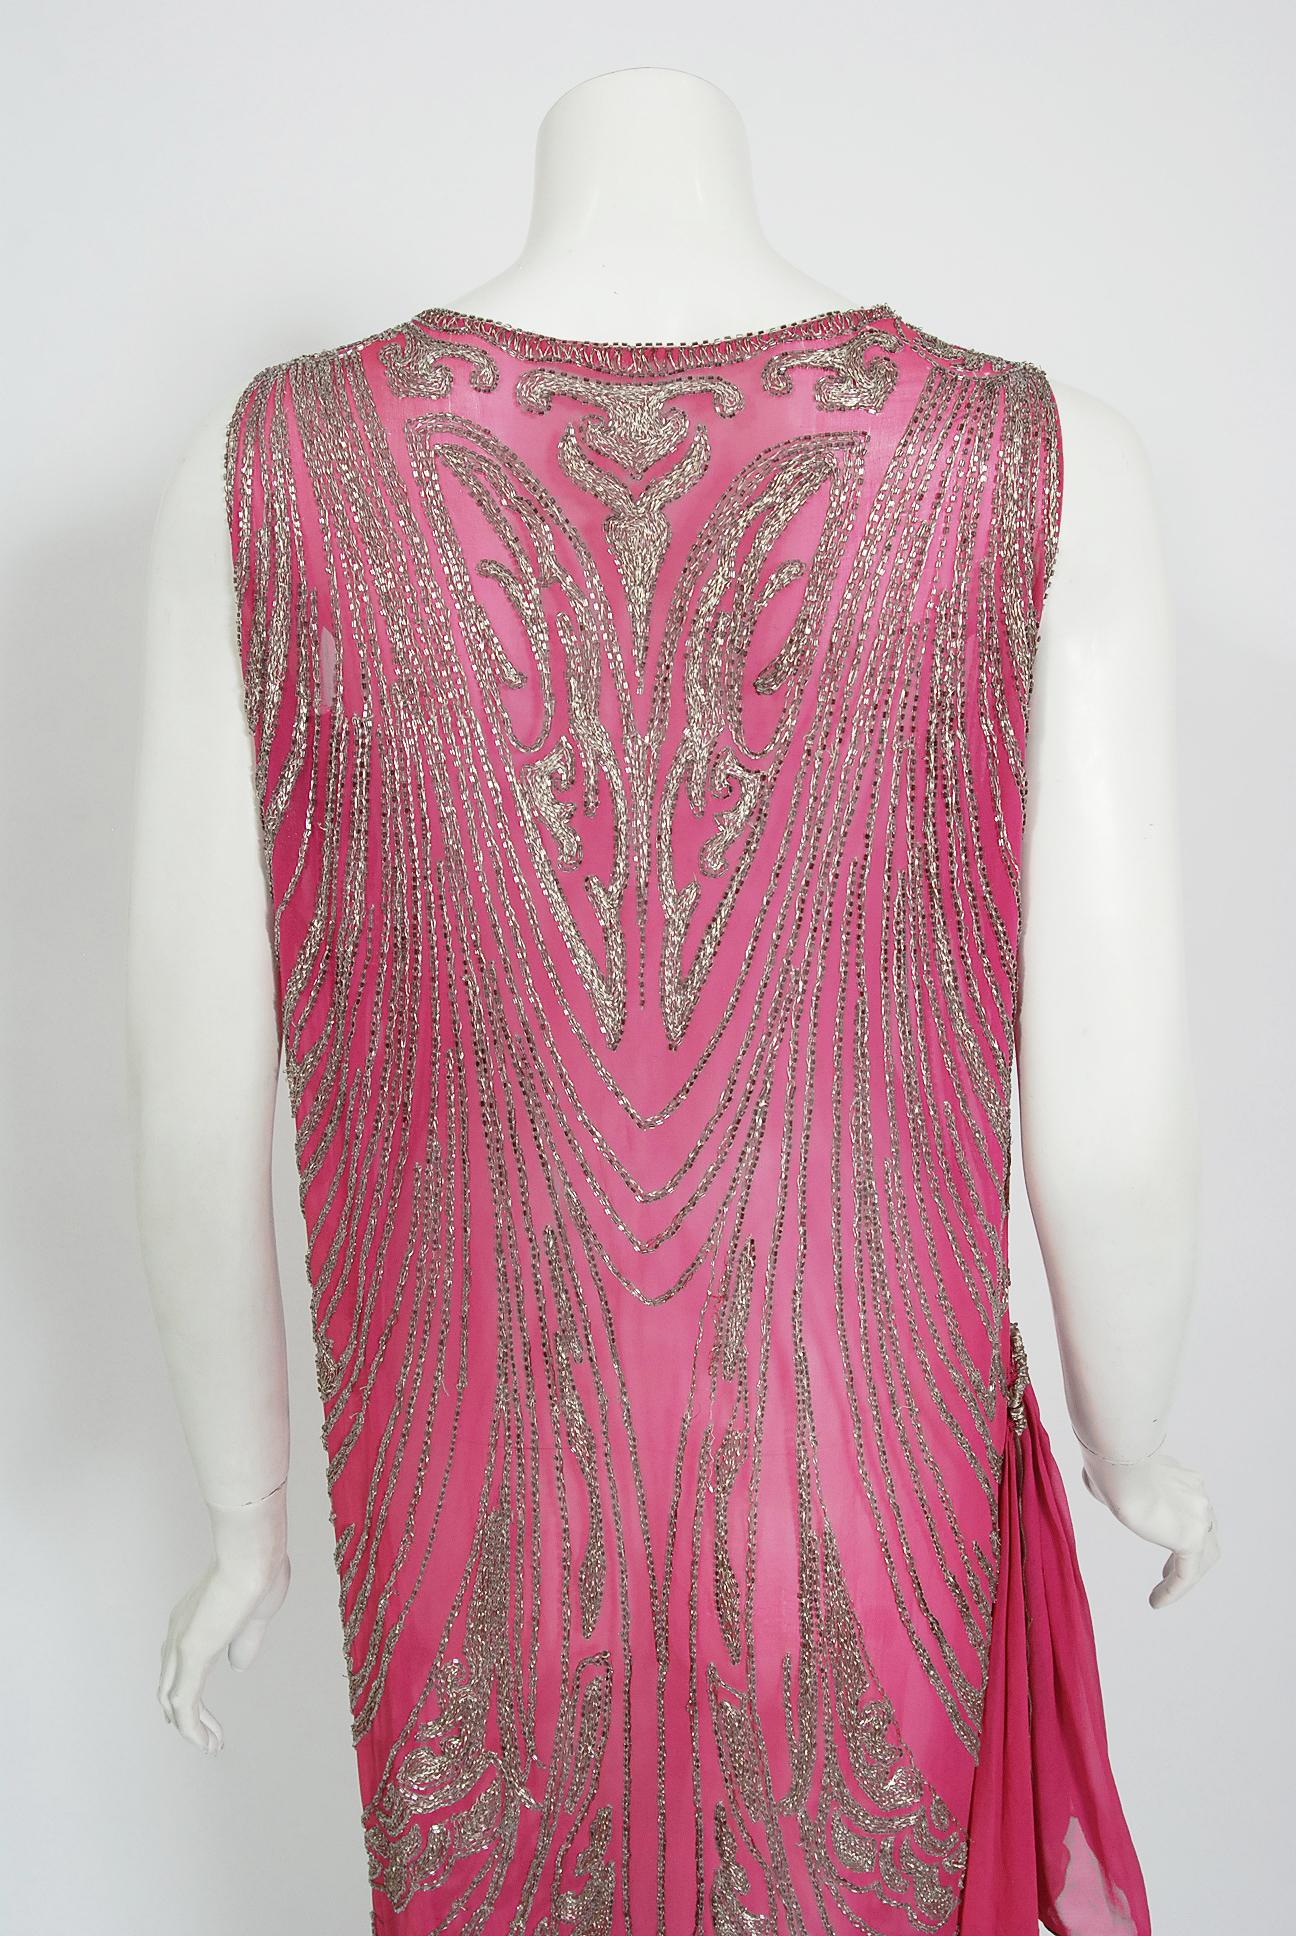 Vintage 1920's French Couture Fuchsia Pink Beaded Embroidered Silk Flapper Dress 3